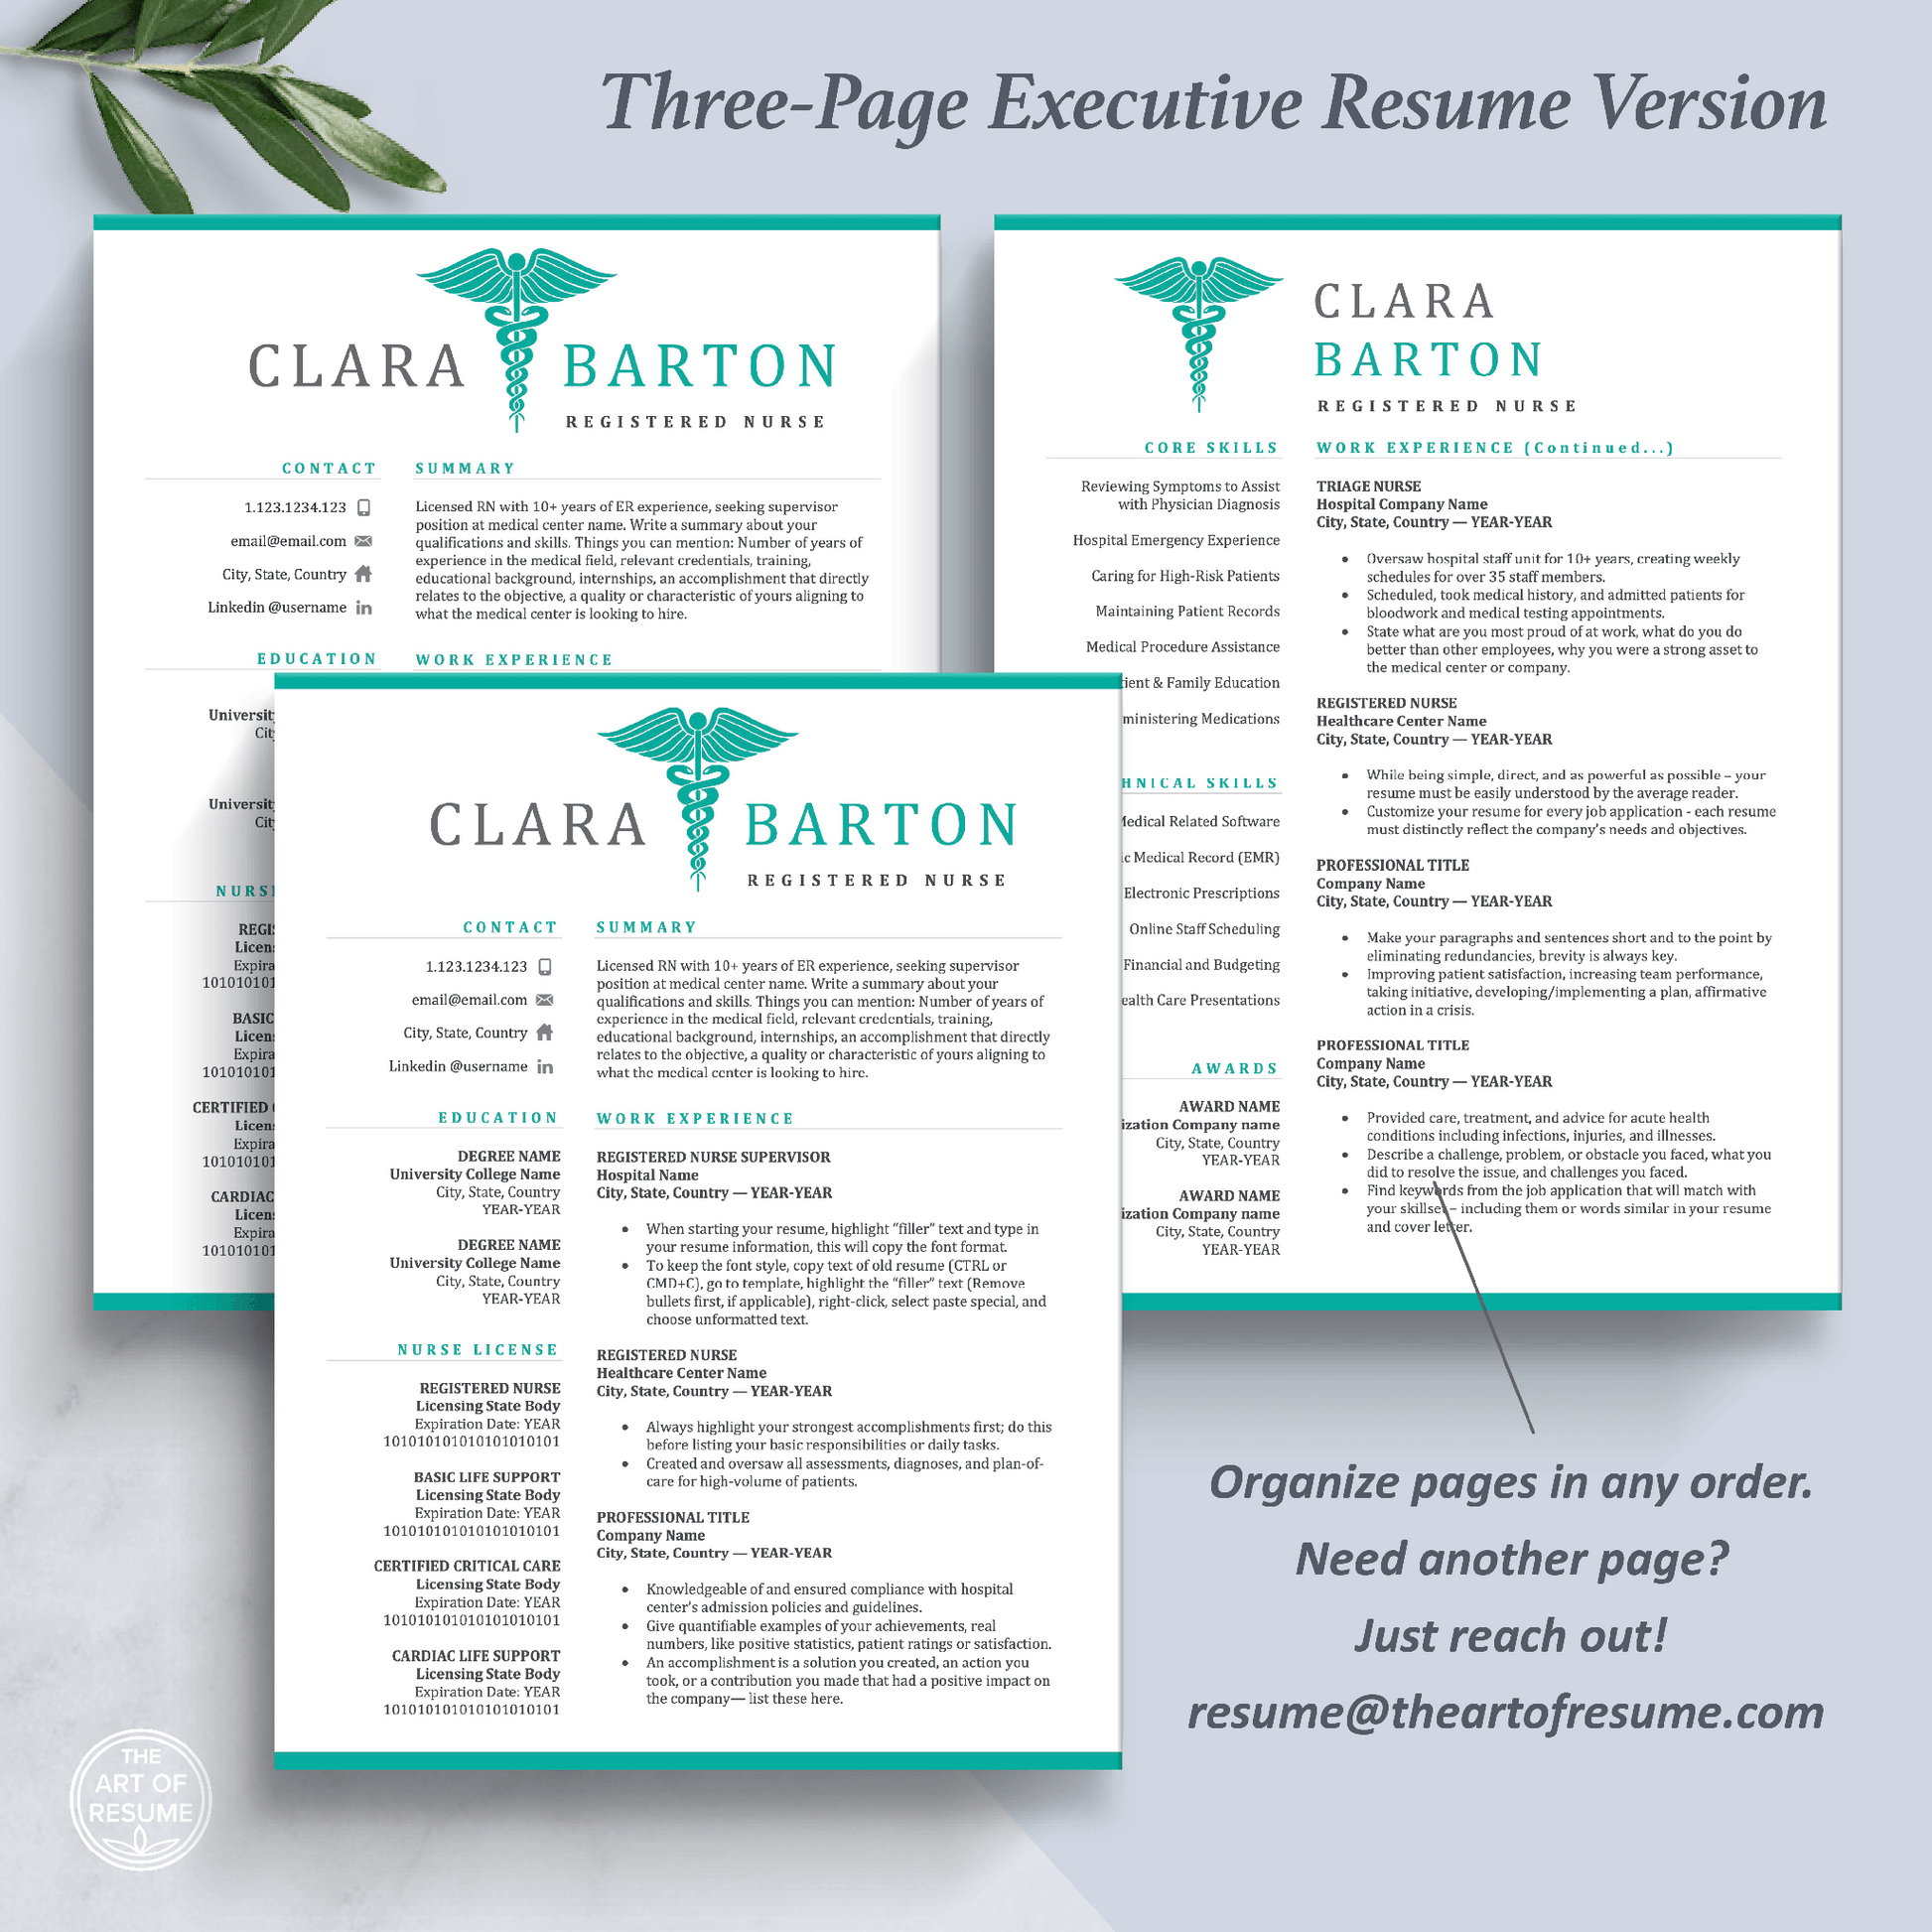 The Art of Resume Templates | Three-Page Professional Nurse Doctor Medical Executive CEO C-Suite Level  Resume CV Template Format | Curriculum Vitae